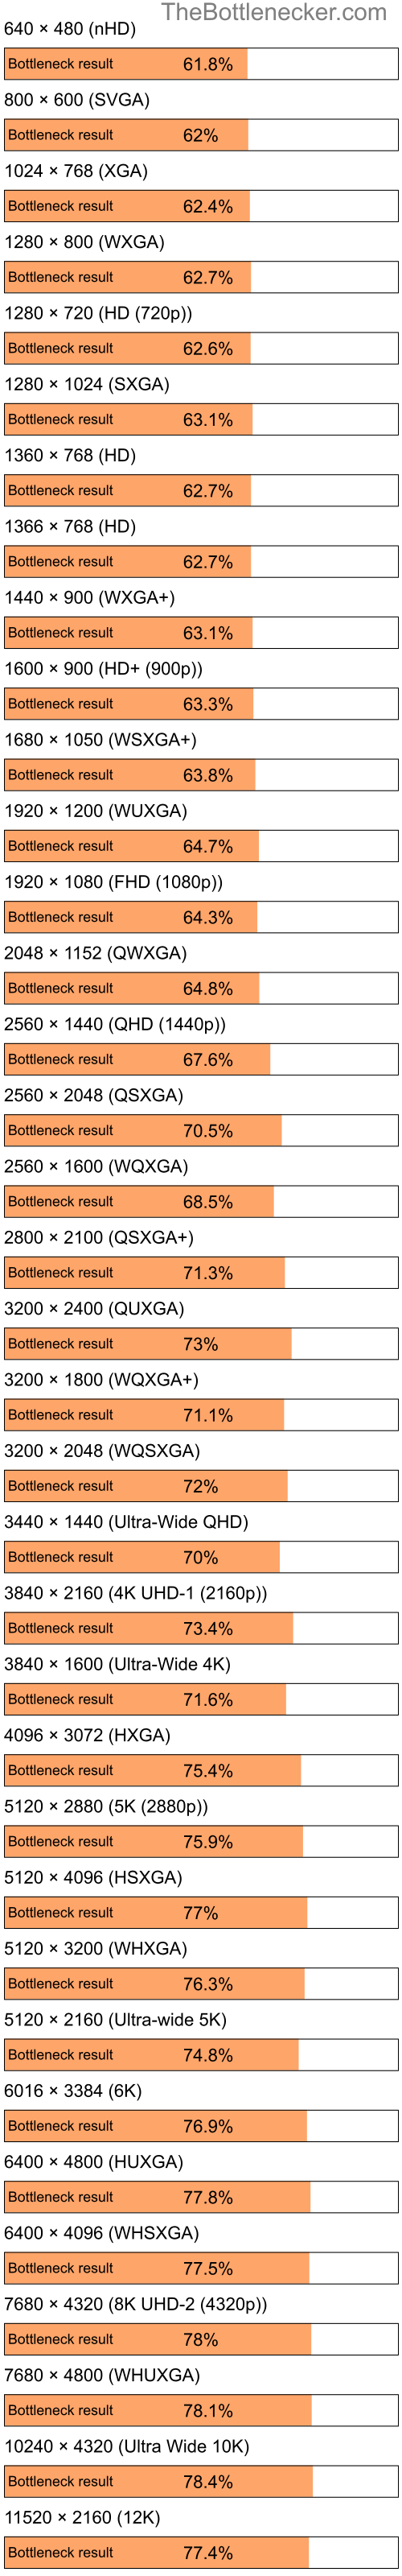 Bottleneck results by resolution for Intel Pentium 4 and AMD Mobility Radeon HD 3430 in General Tasks